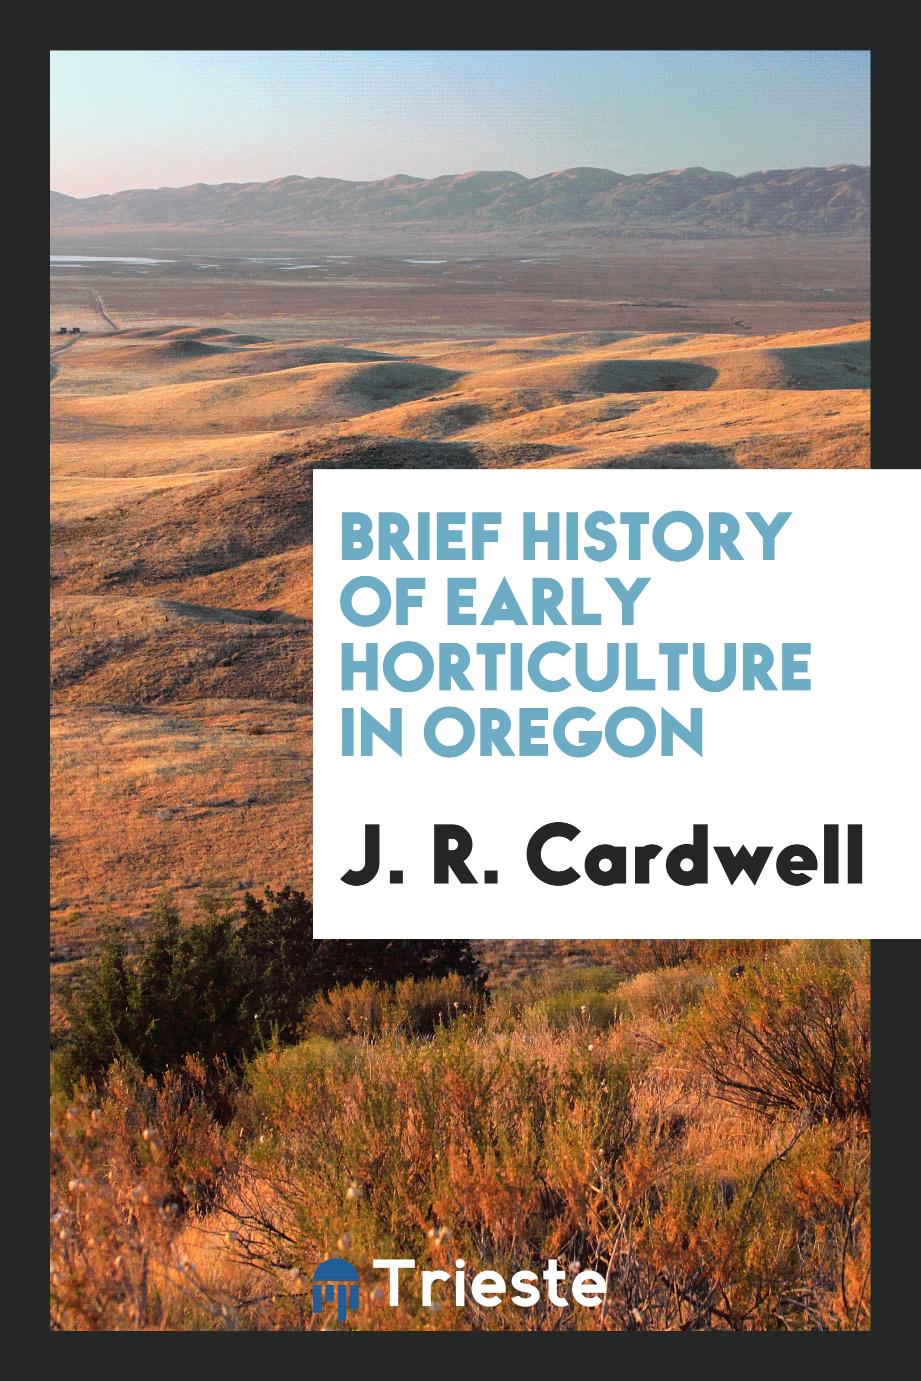 Brief History of Early Horticulture in Oregon